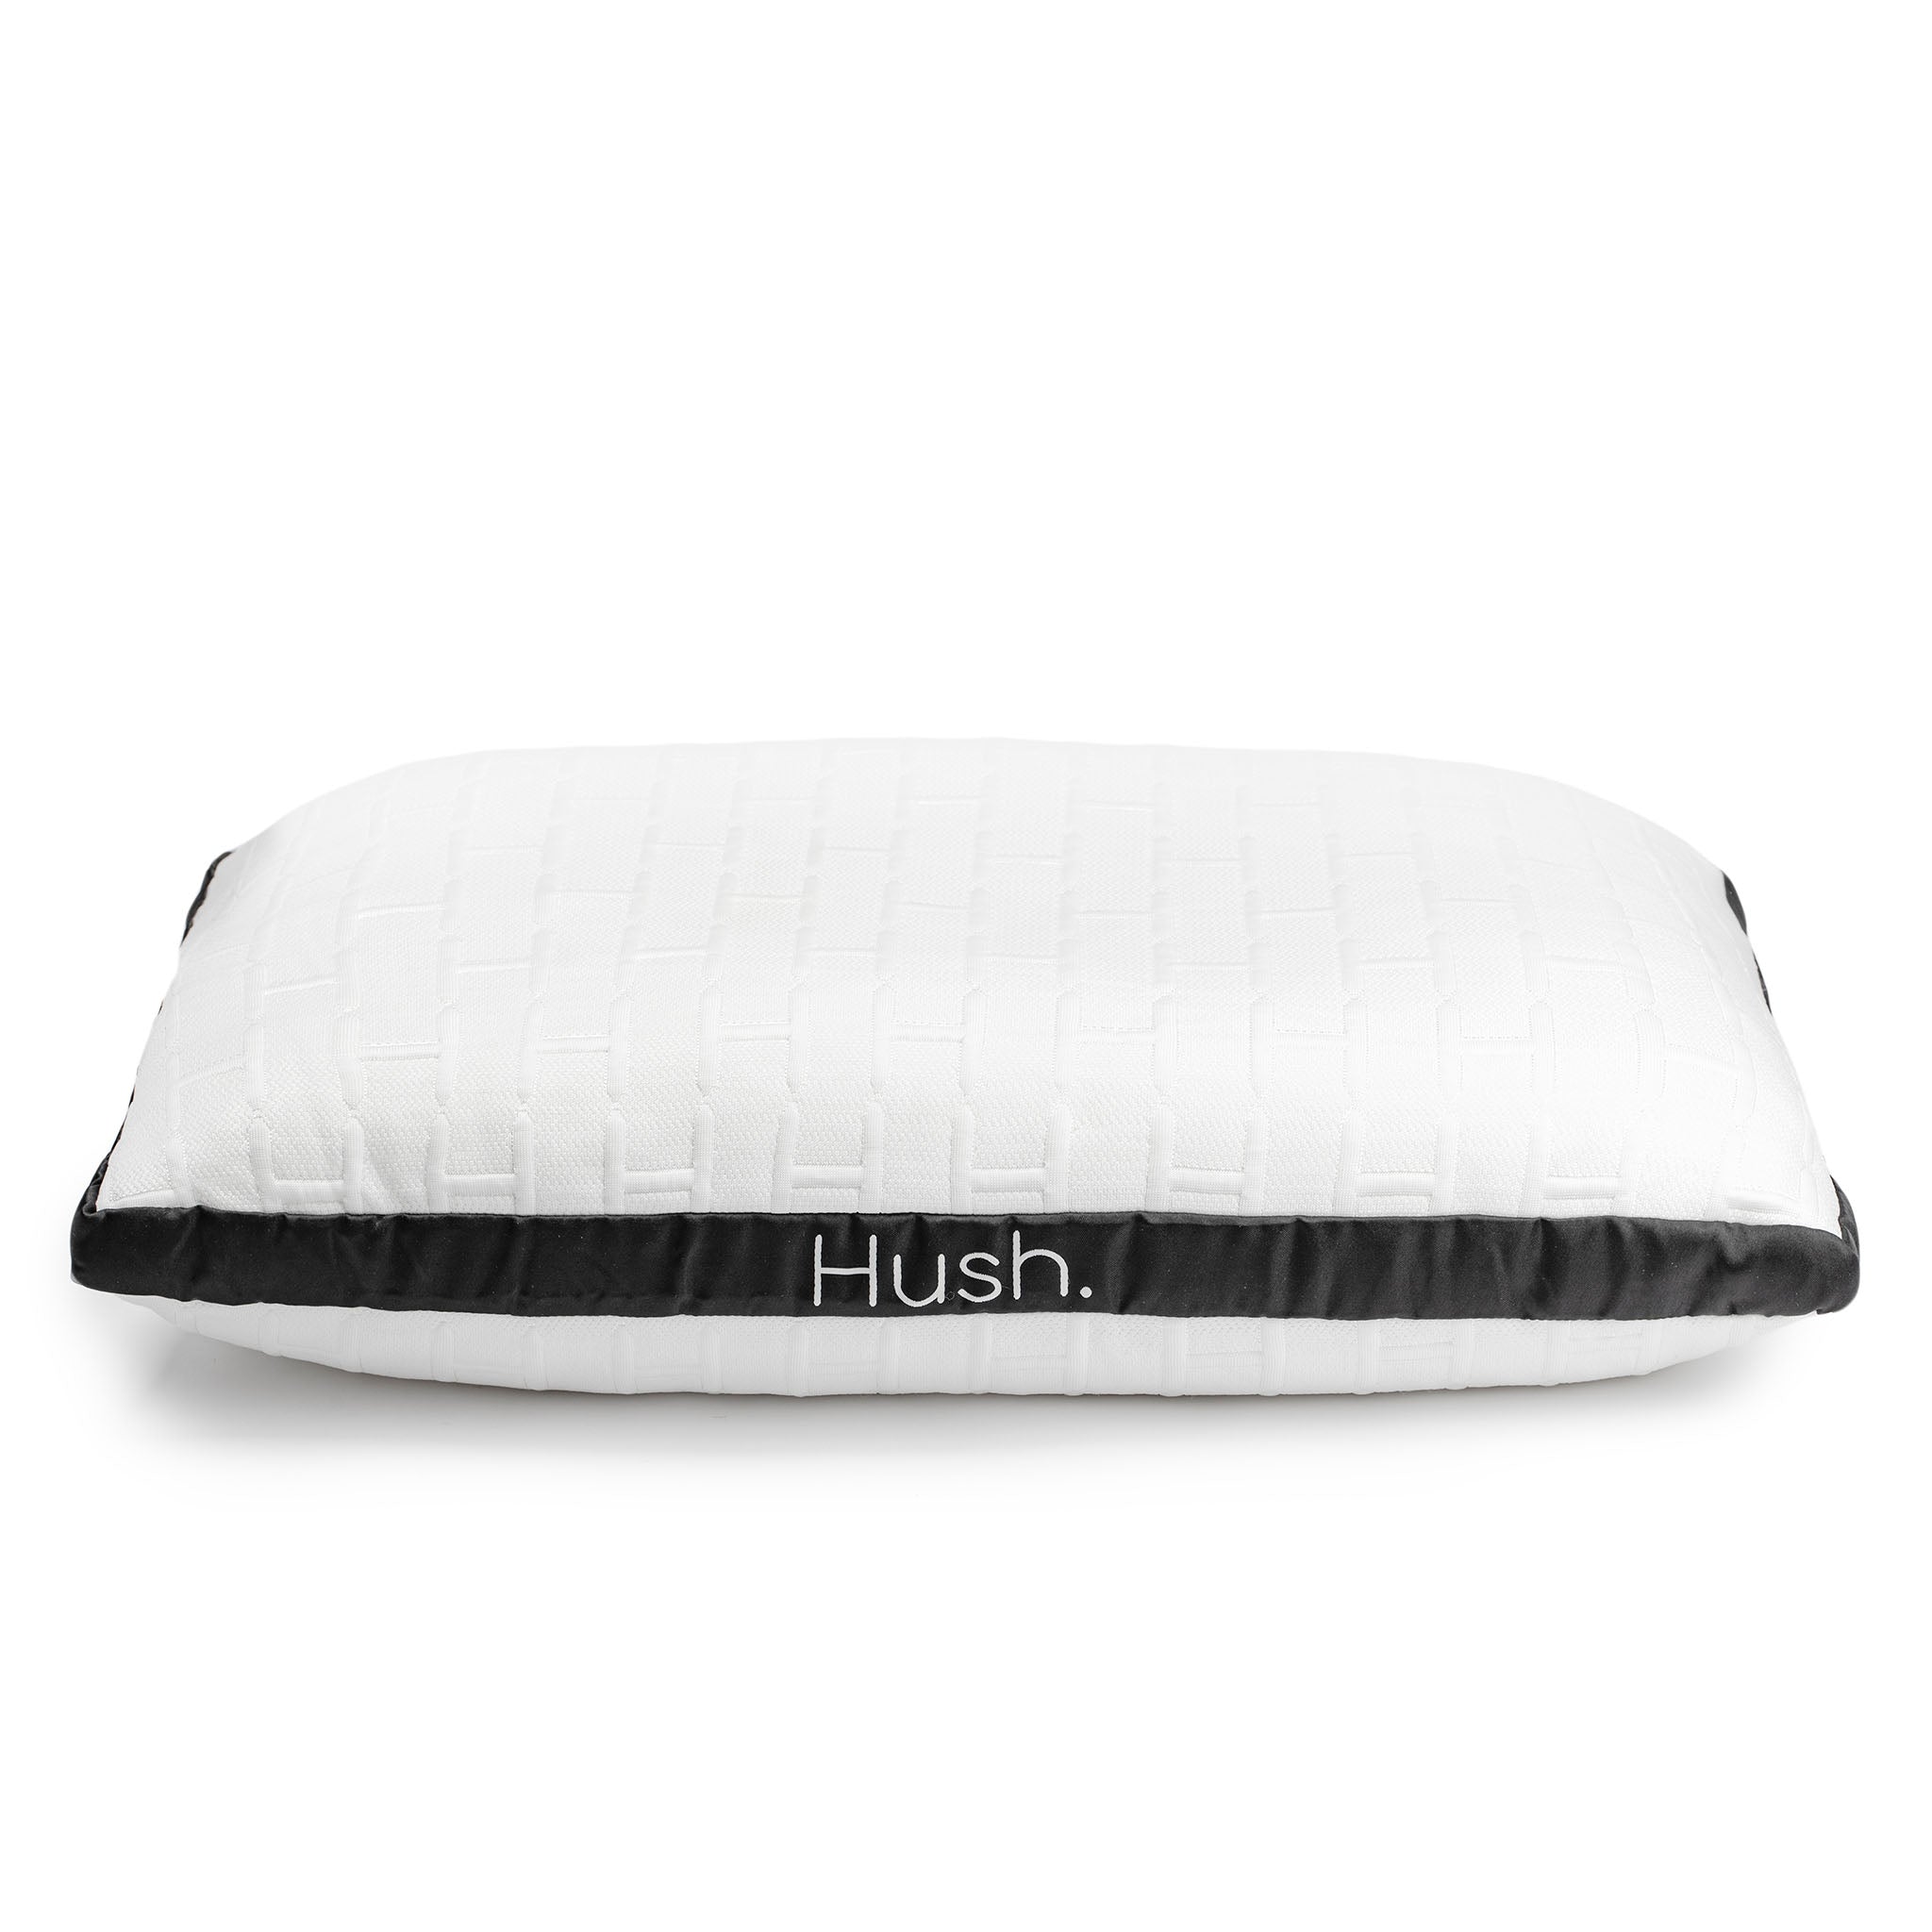 Cosy House Collection Luxury Bamboo Shredded Memory Foam Pillow - Adjustable & Removable Fill - Ultra Soft, Cool & Breathable Cover with Zipper